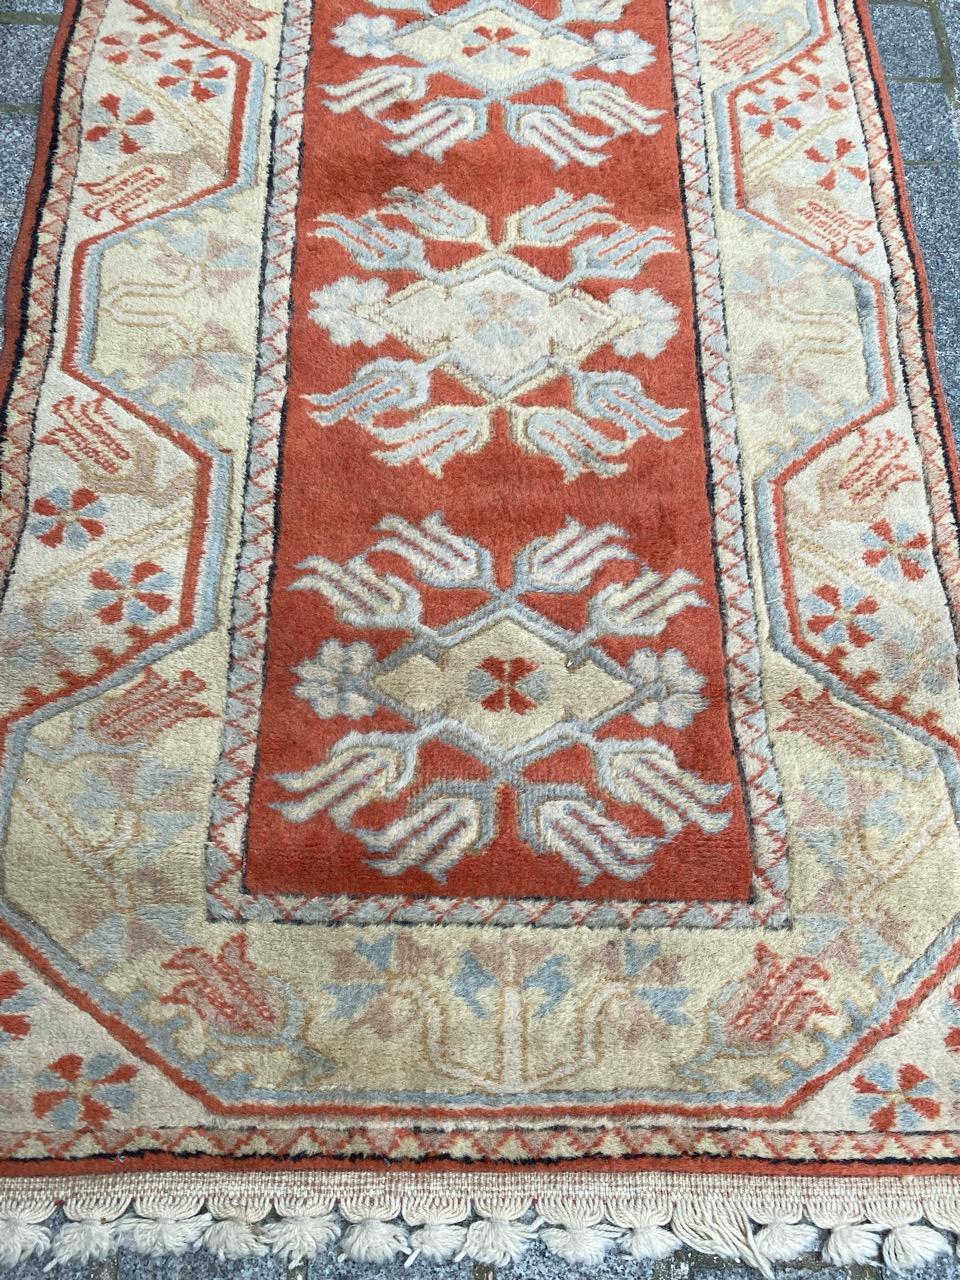 Nice late 20th century Turkish Anatolian rug, with beautiful geometrical oushak design and nice colors, entirely hand knotted with wool velvet on wool foundation.

✨✨✨
